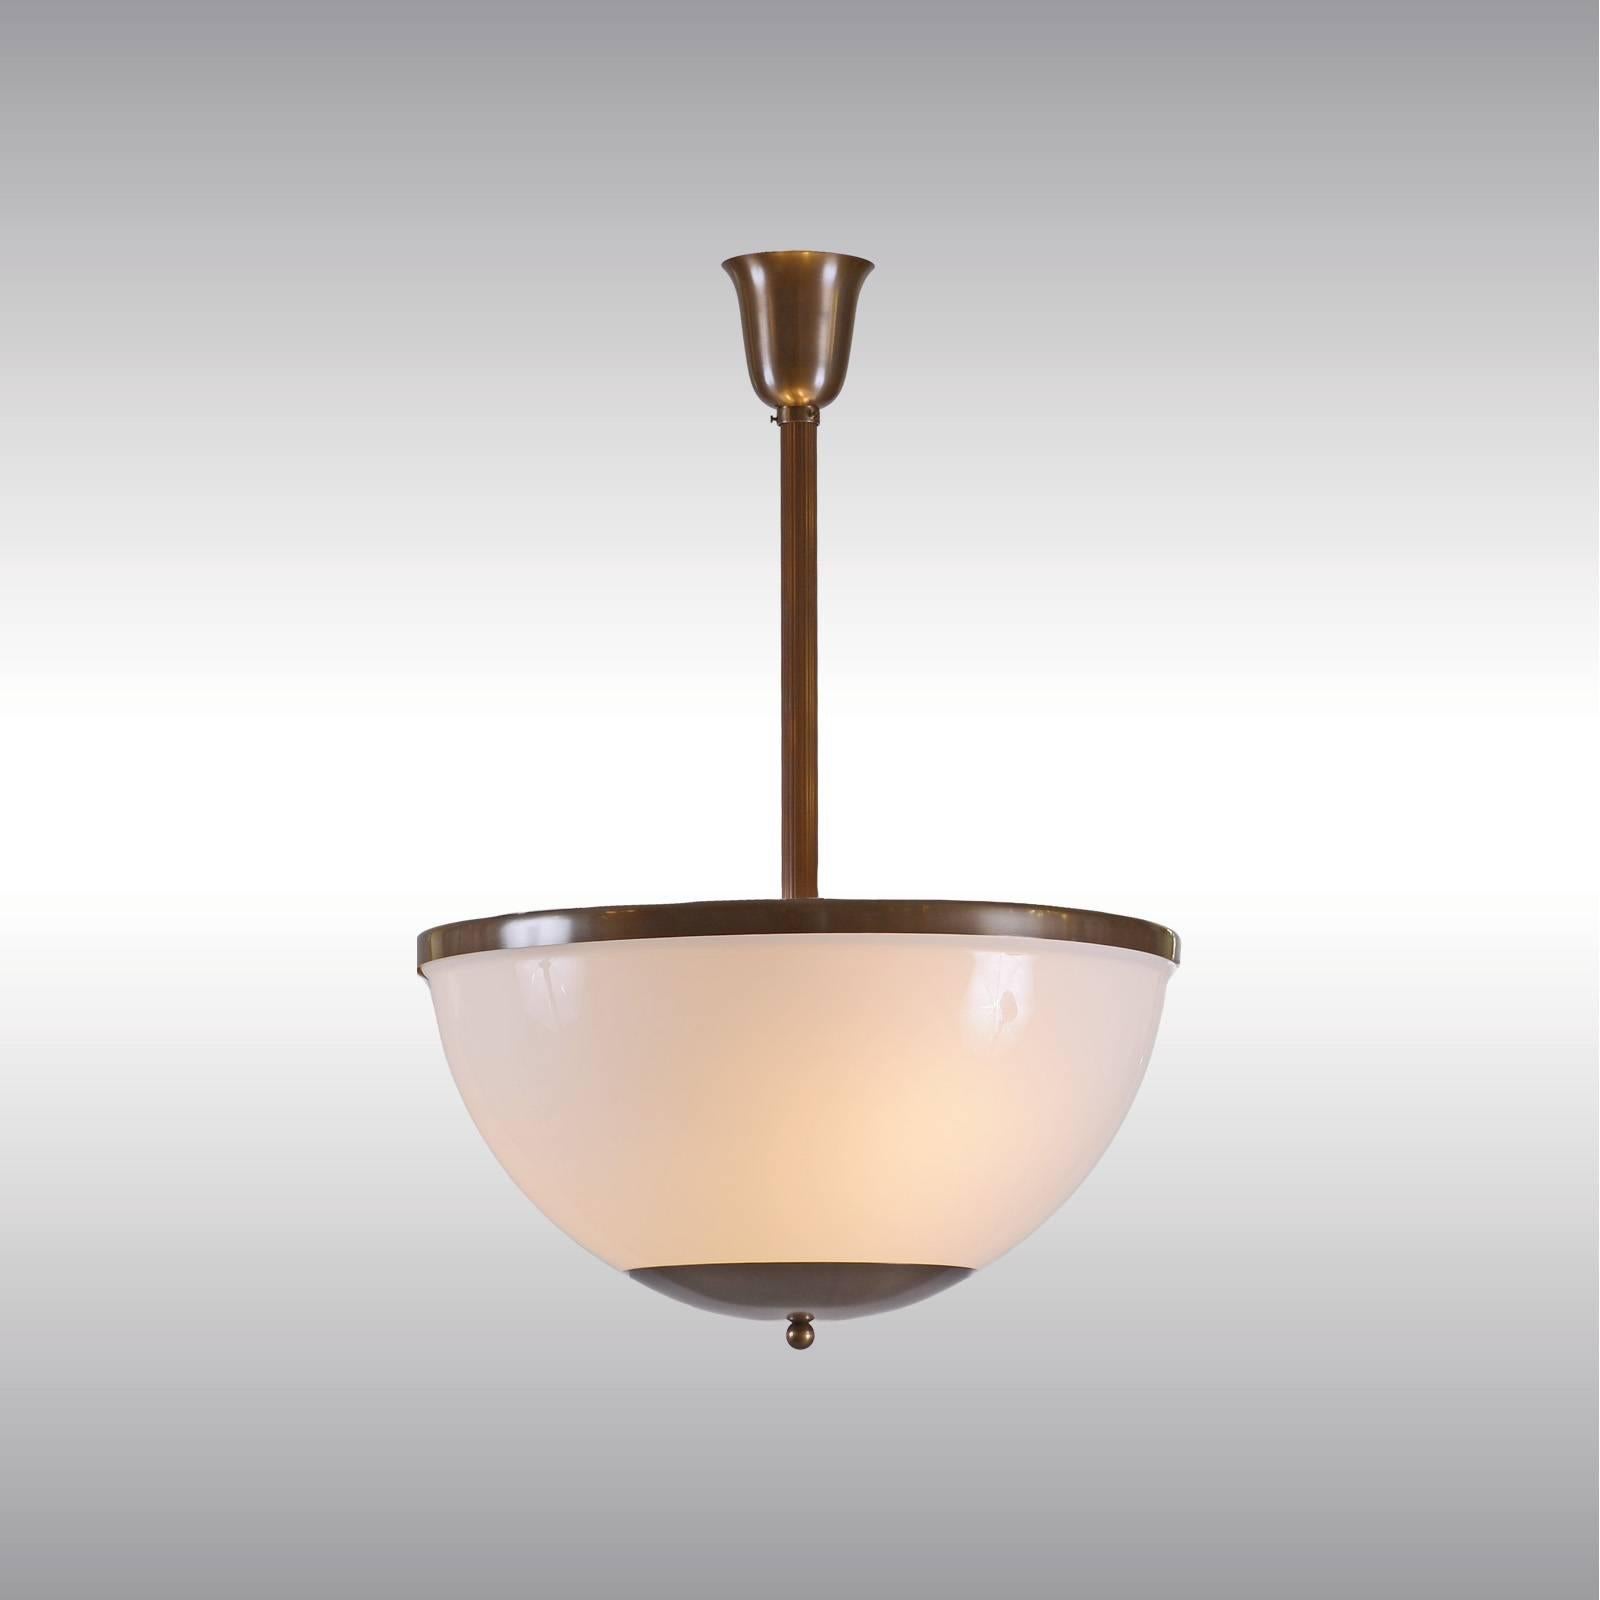 Ceiling light with Opaline glass shade comes as well as a downlight
Brass, optionally varnished or nickel-plated, all other surfaces on request, Opaline-glass, handblown.
Length of the lamp can be customized. Lampshade is available in different